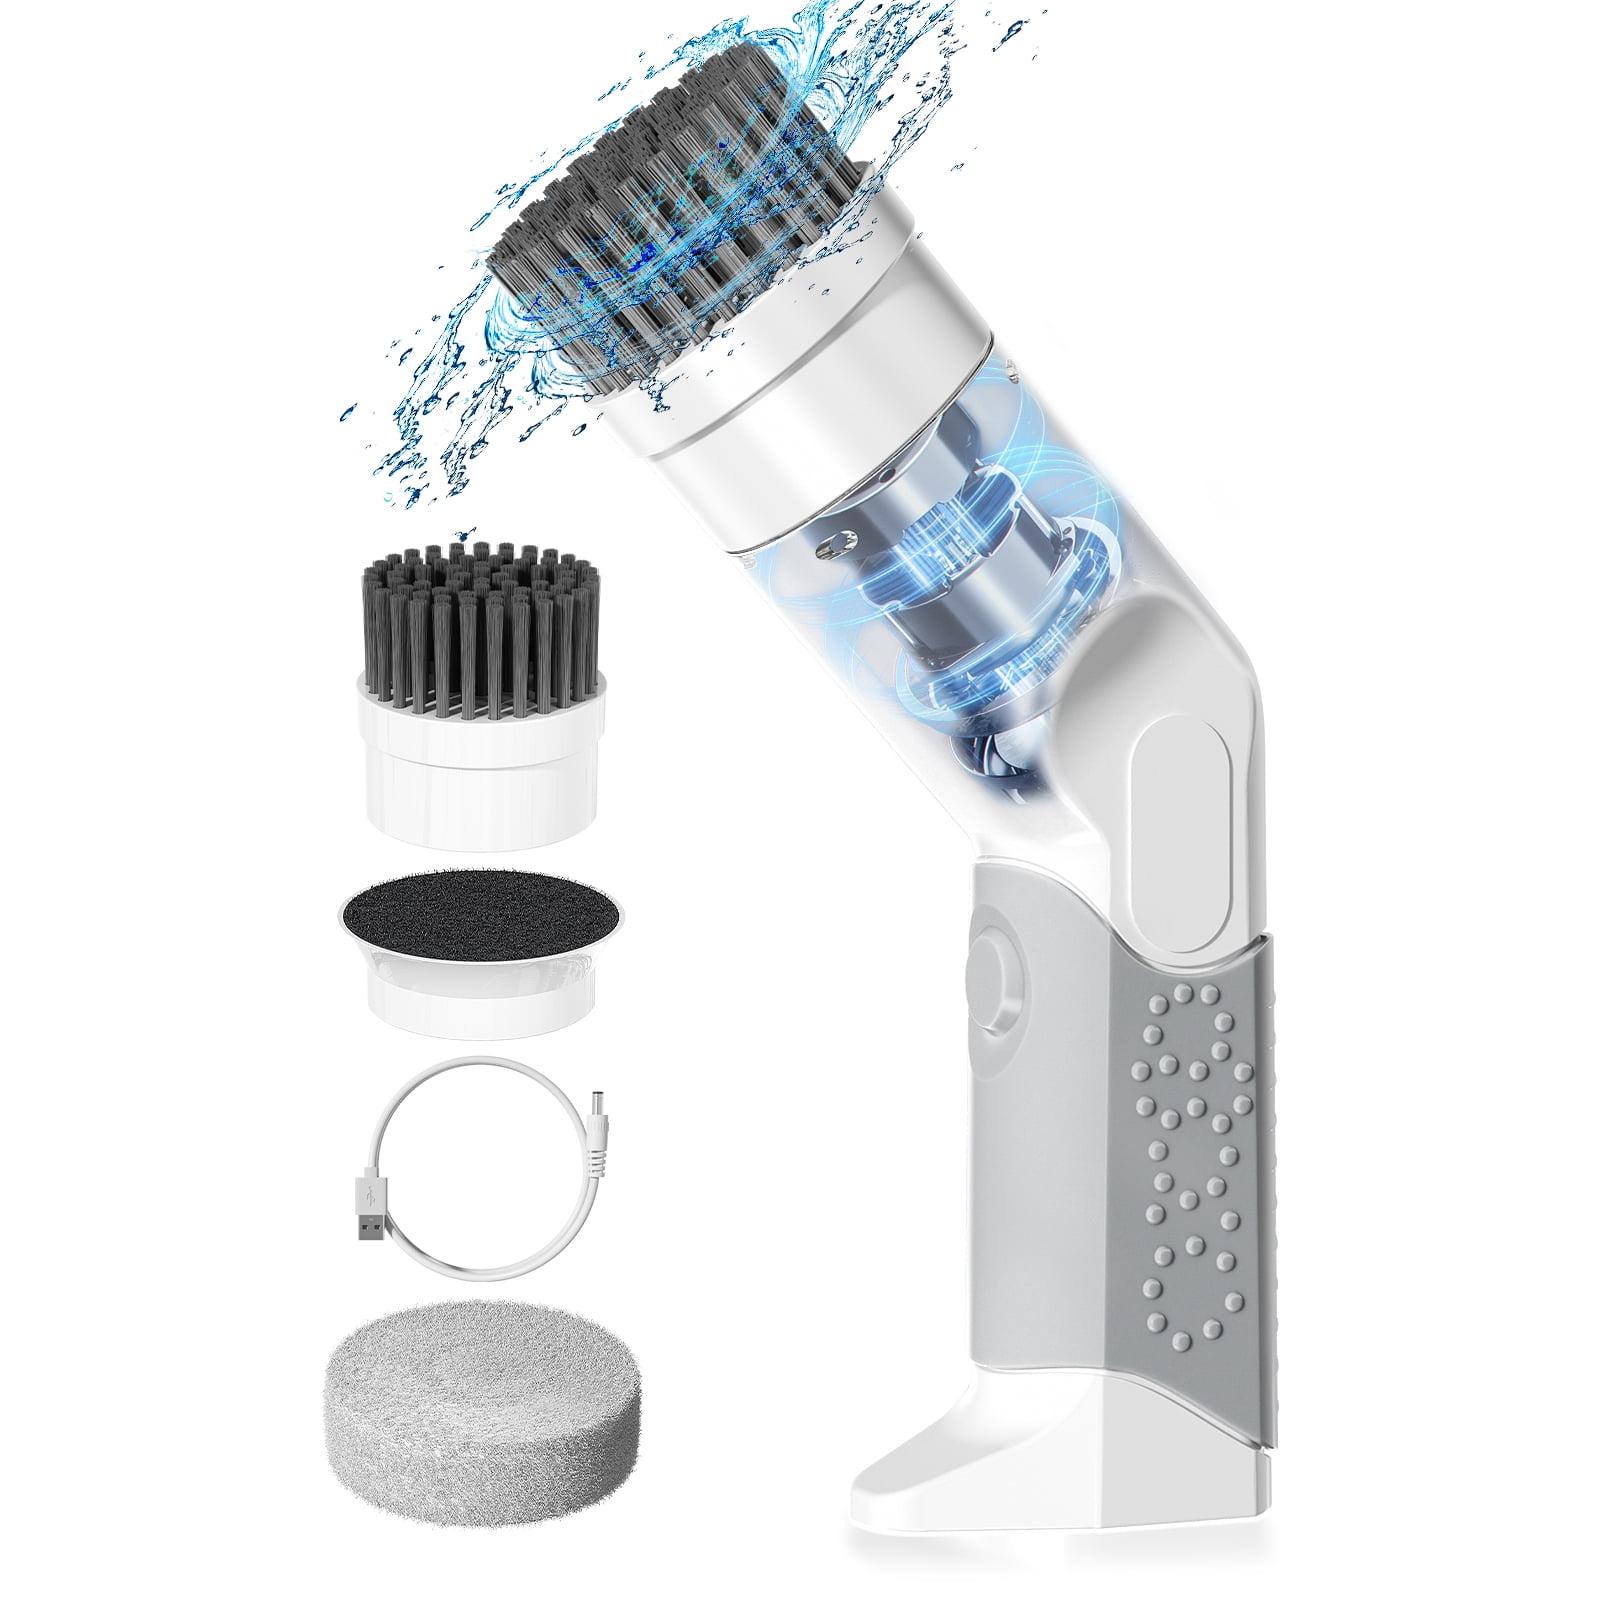 Dropship Electric Cleaning Brush Rechargeable Cleaner Handheld Bathtub 3  Brush Head Toilet Wash Brush Kitchen Bathroom Sink Cleaner Tool to Sell  Online at a Lower Price